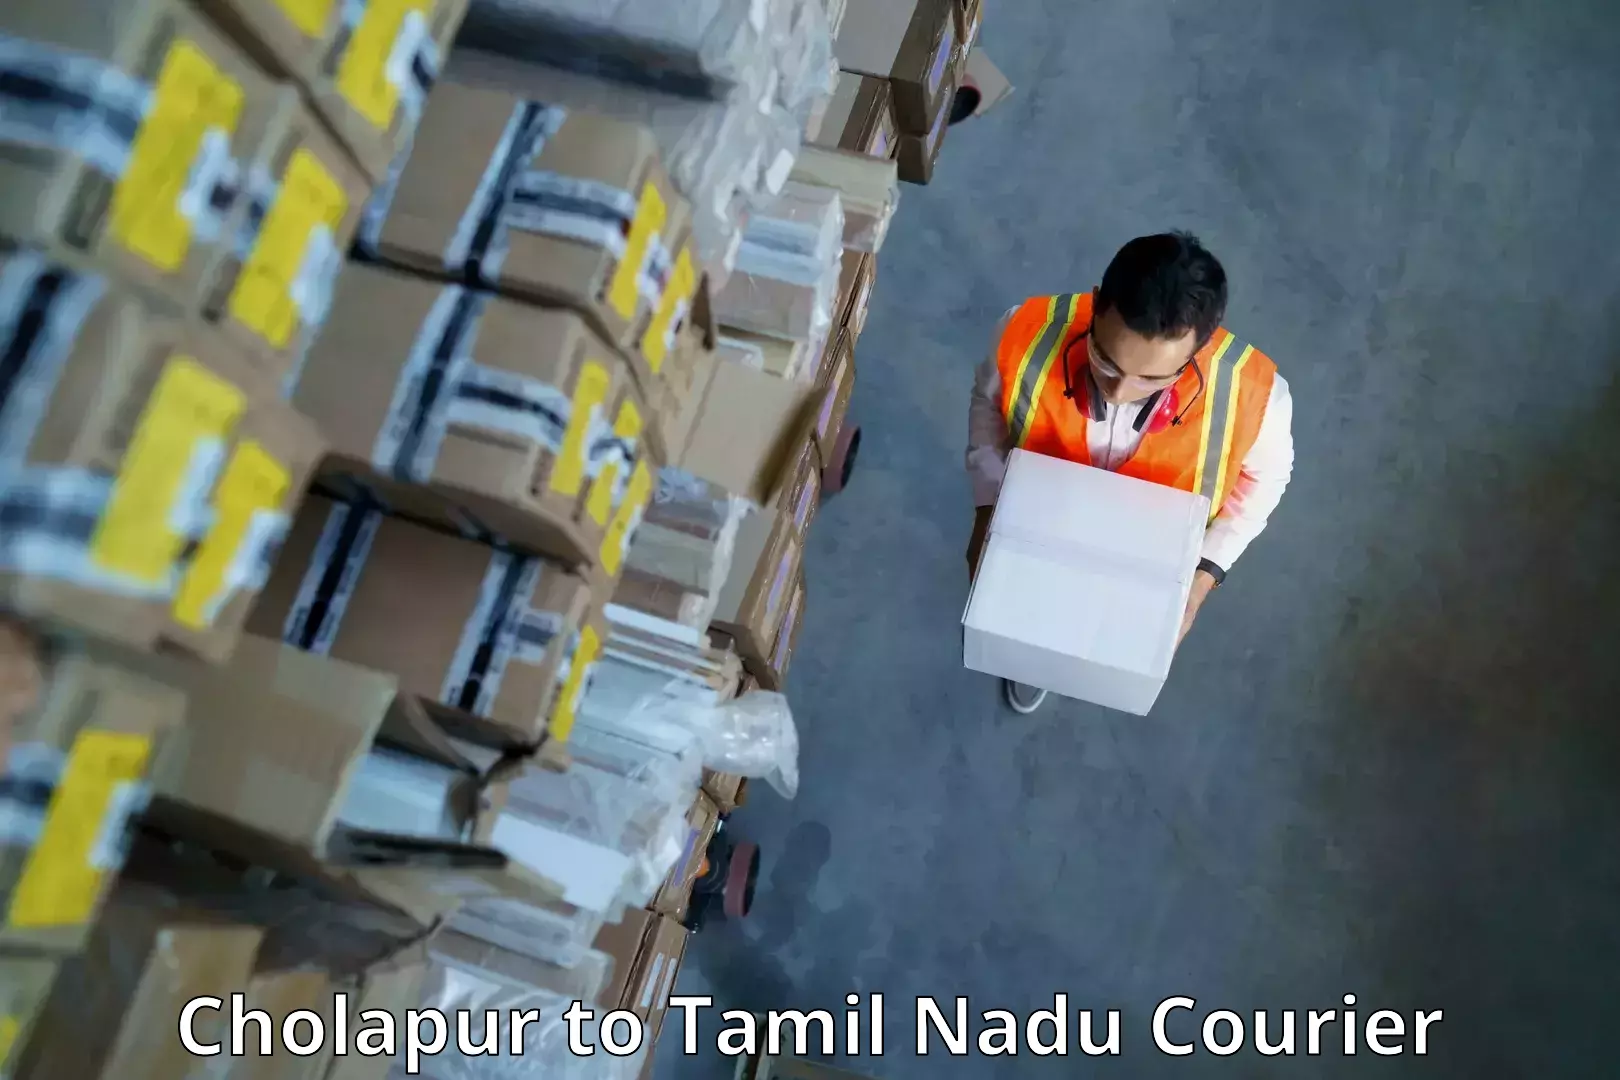 Global courier networks Cholapur to Perunali